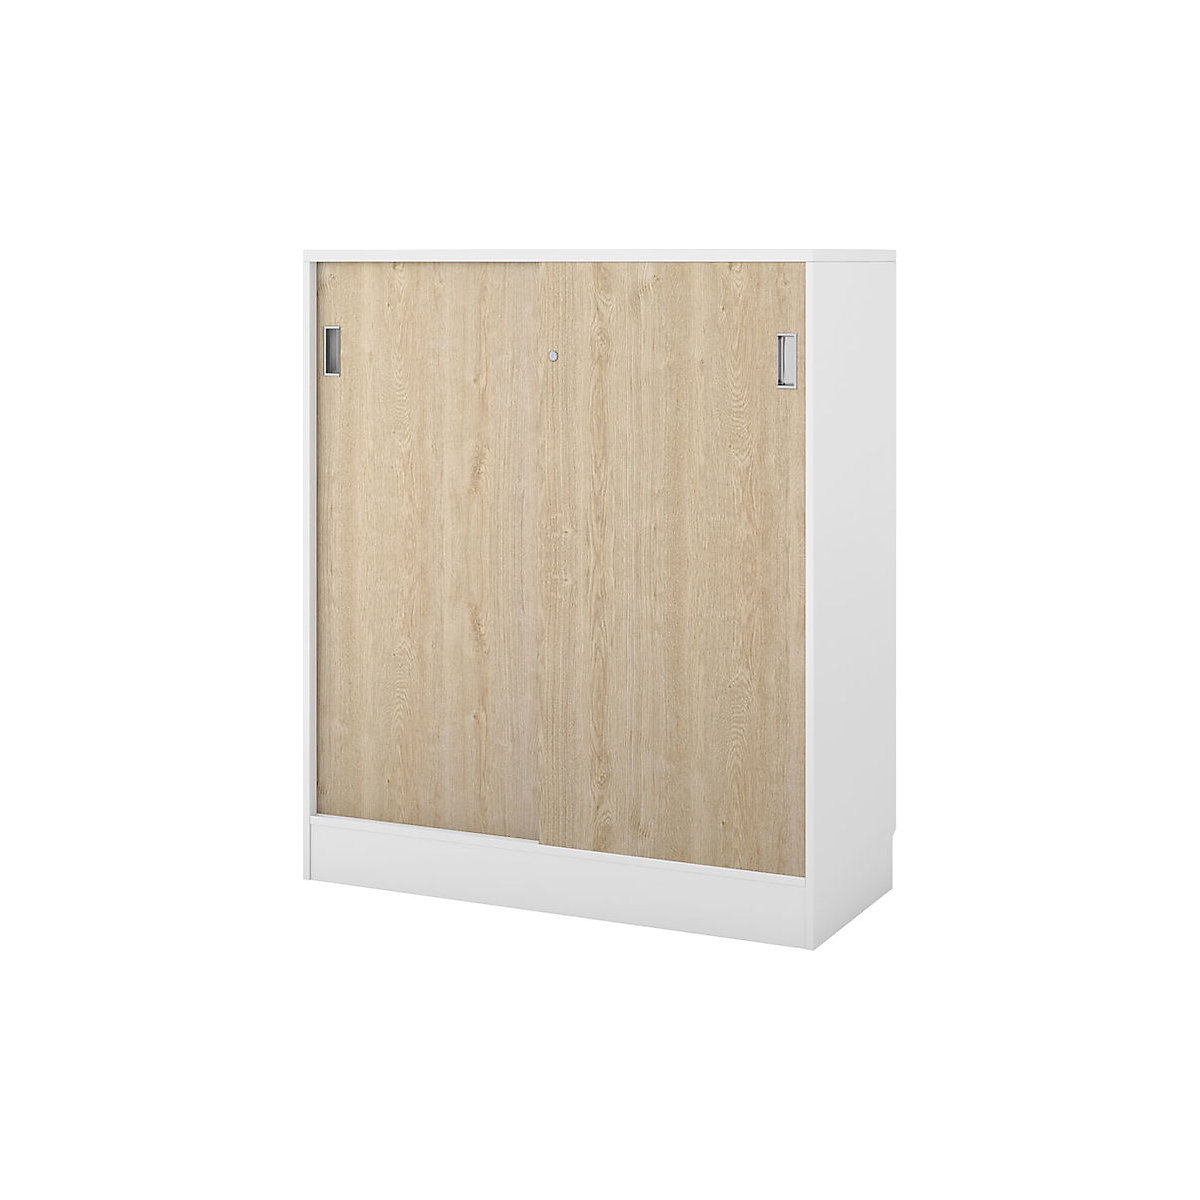 Chicago cupboard with sliding doors, HxWxD 1353 x 1215 x 400 mm, brushed white / oak-6